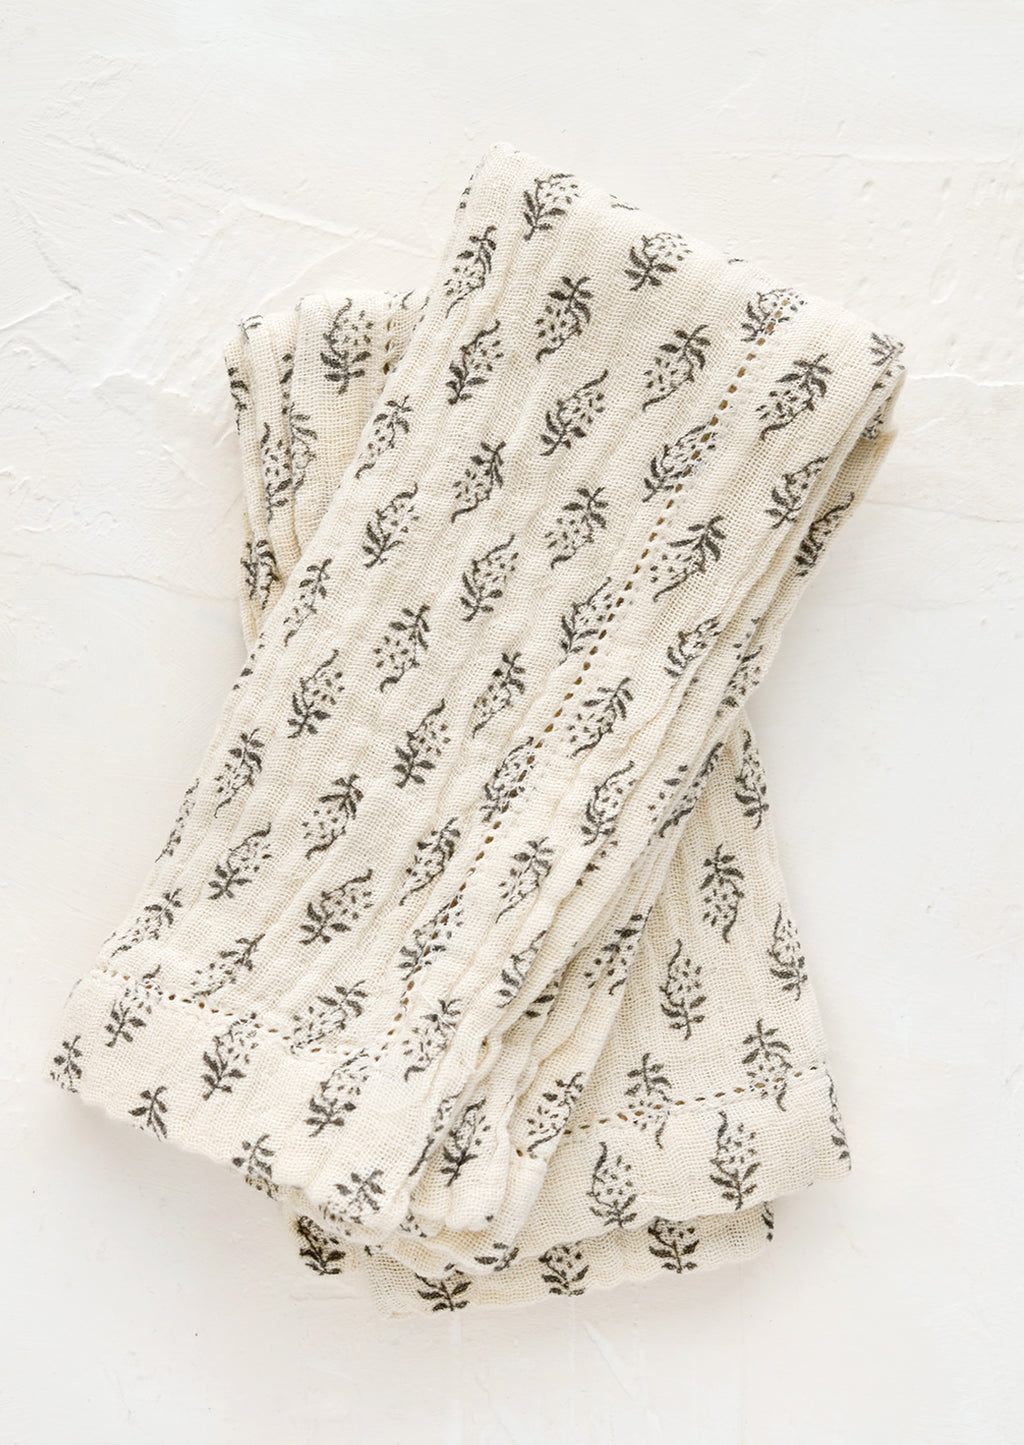 1: A pair of undyed cotton gauze napkins with grey floral motif and hemstitch detailing. 